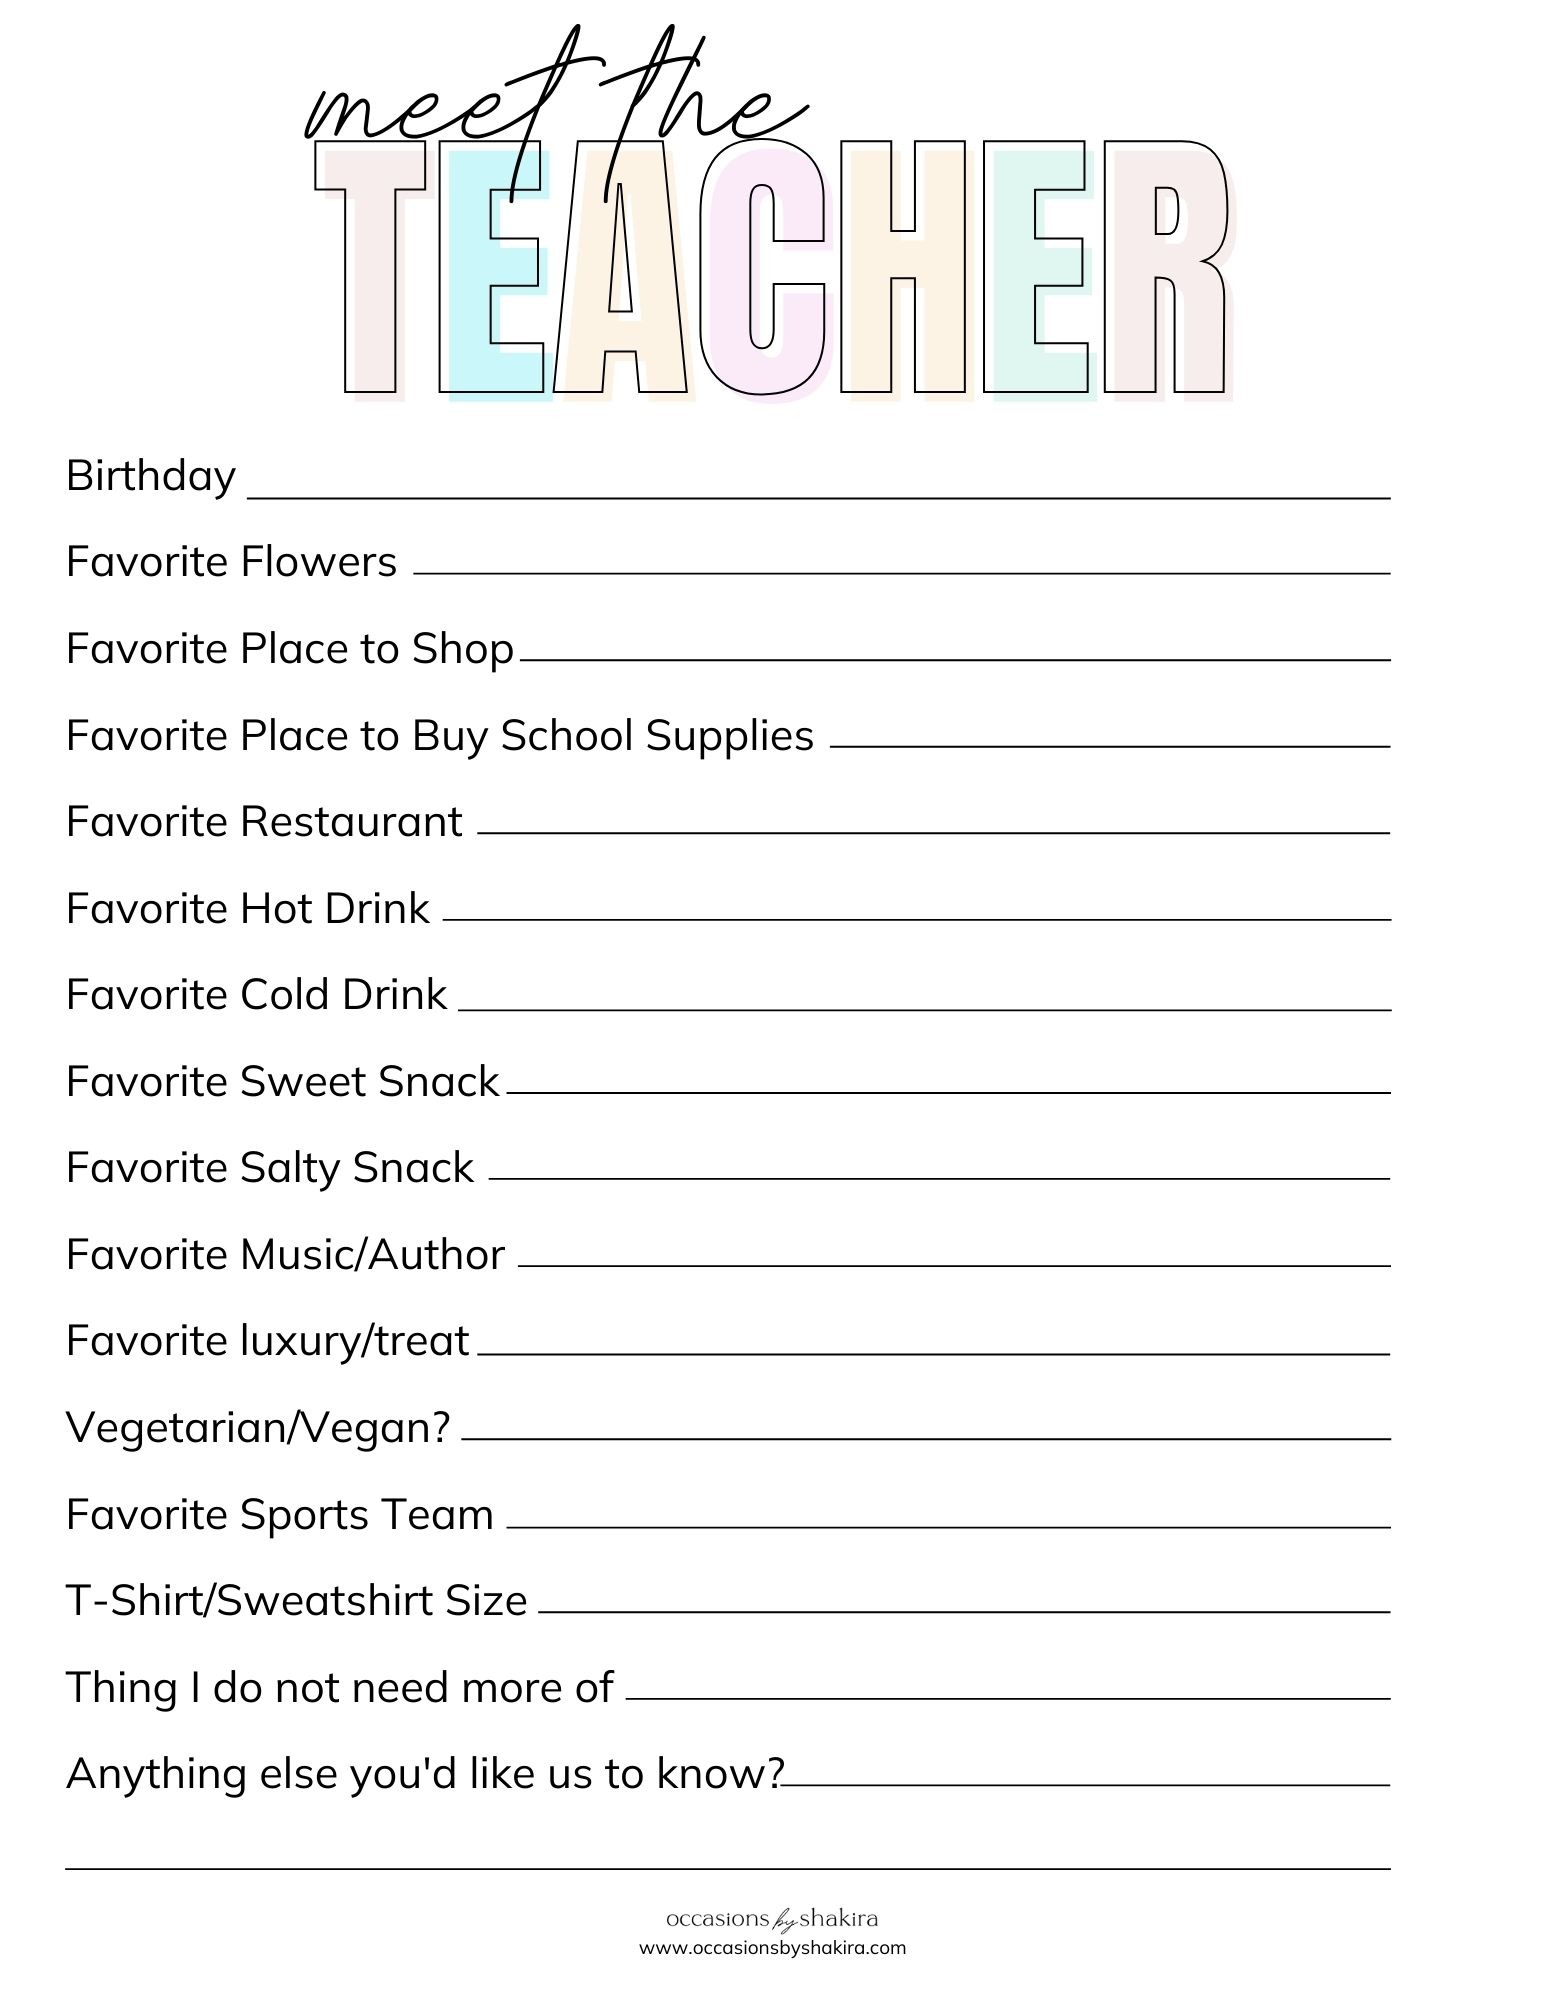 PRINTABLE Teacher Flair Pen Gift Tag Teacher Appreciation Instant Download  Ready to Print (Download Now) 